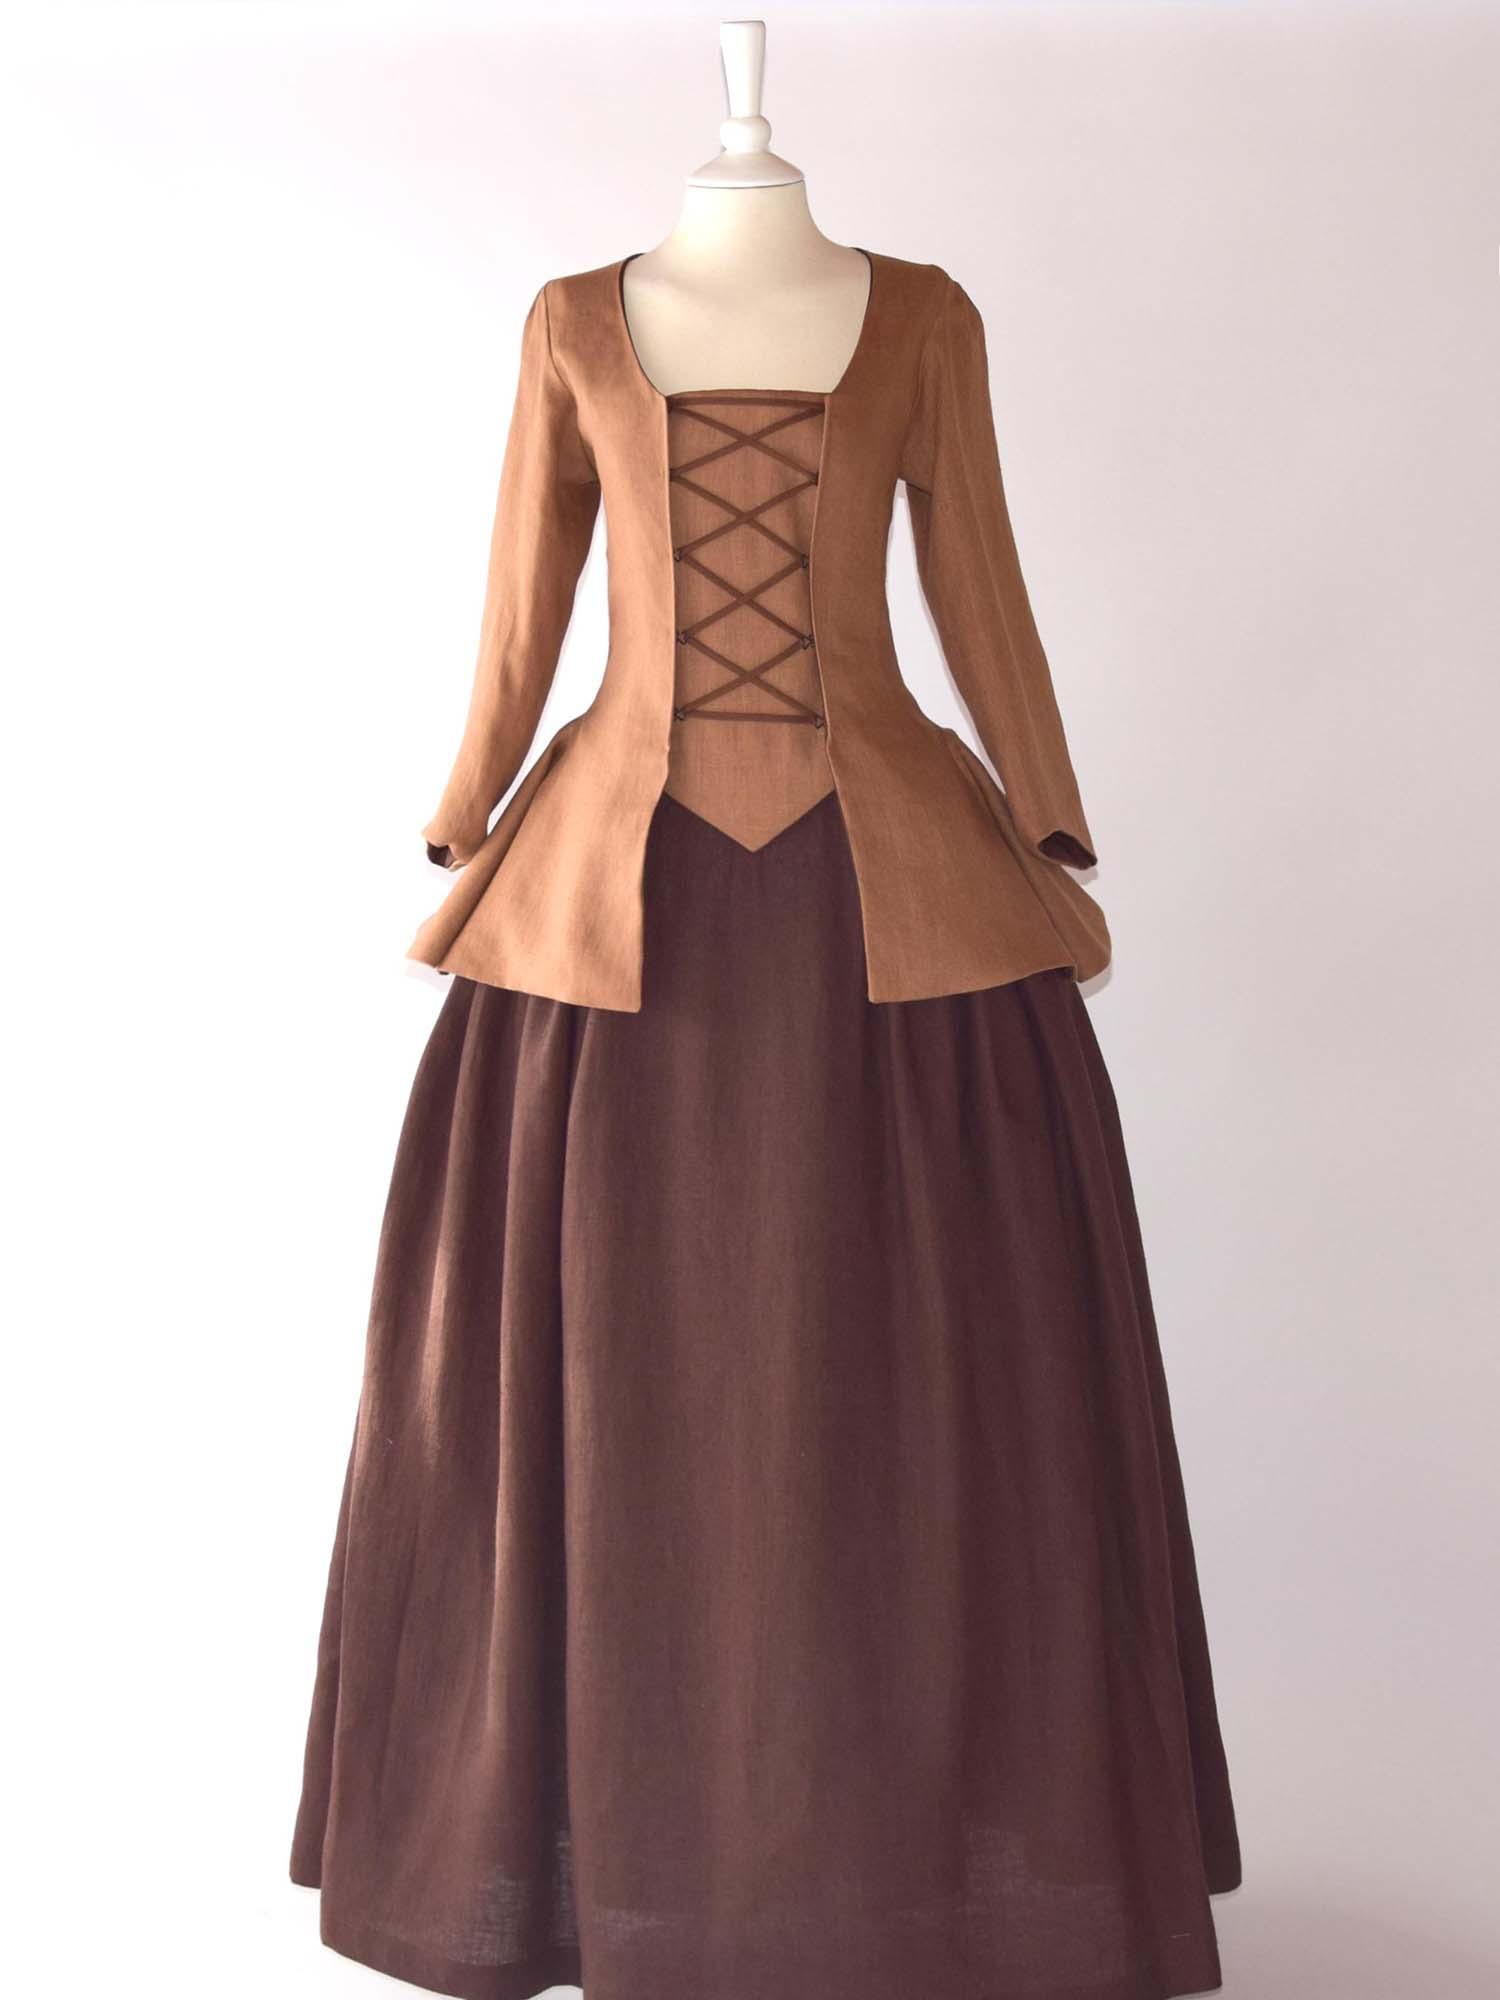 JANET, Colonial Costume in Toffee &amp; Chocolate Linen - Atelier Serraspina